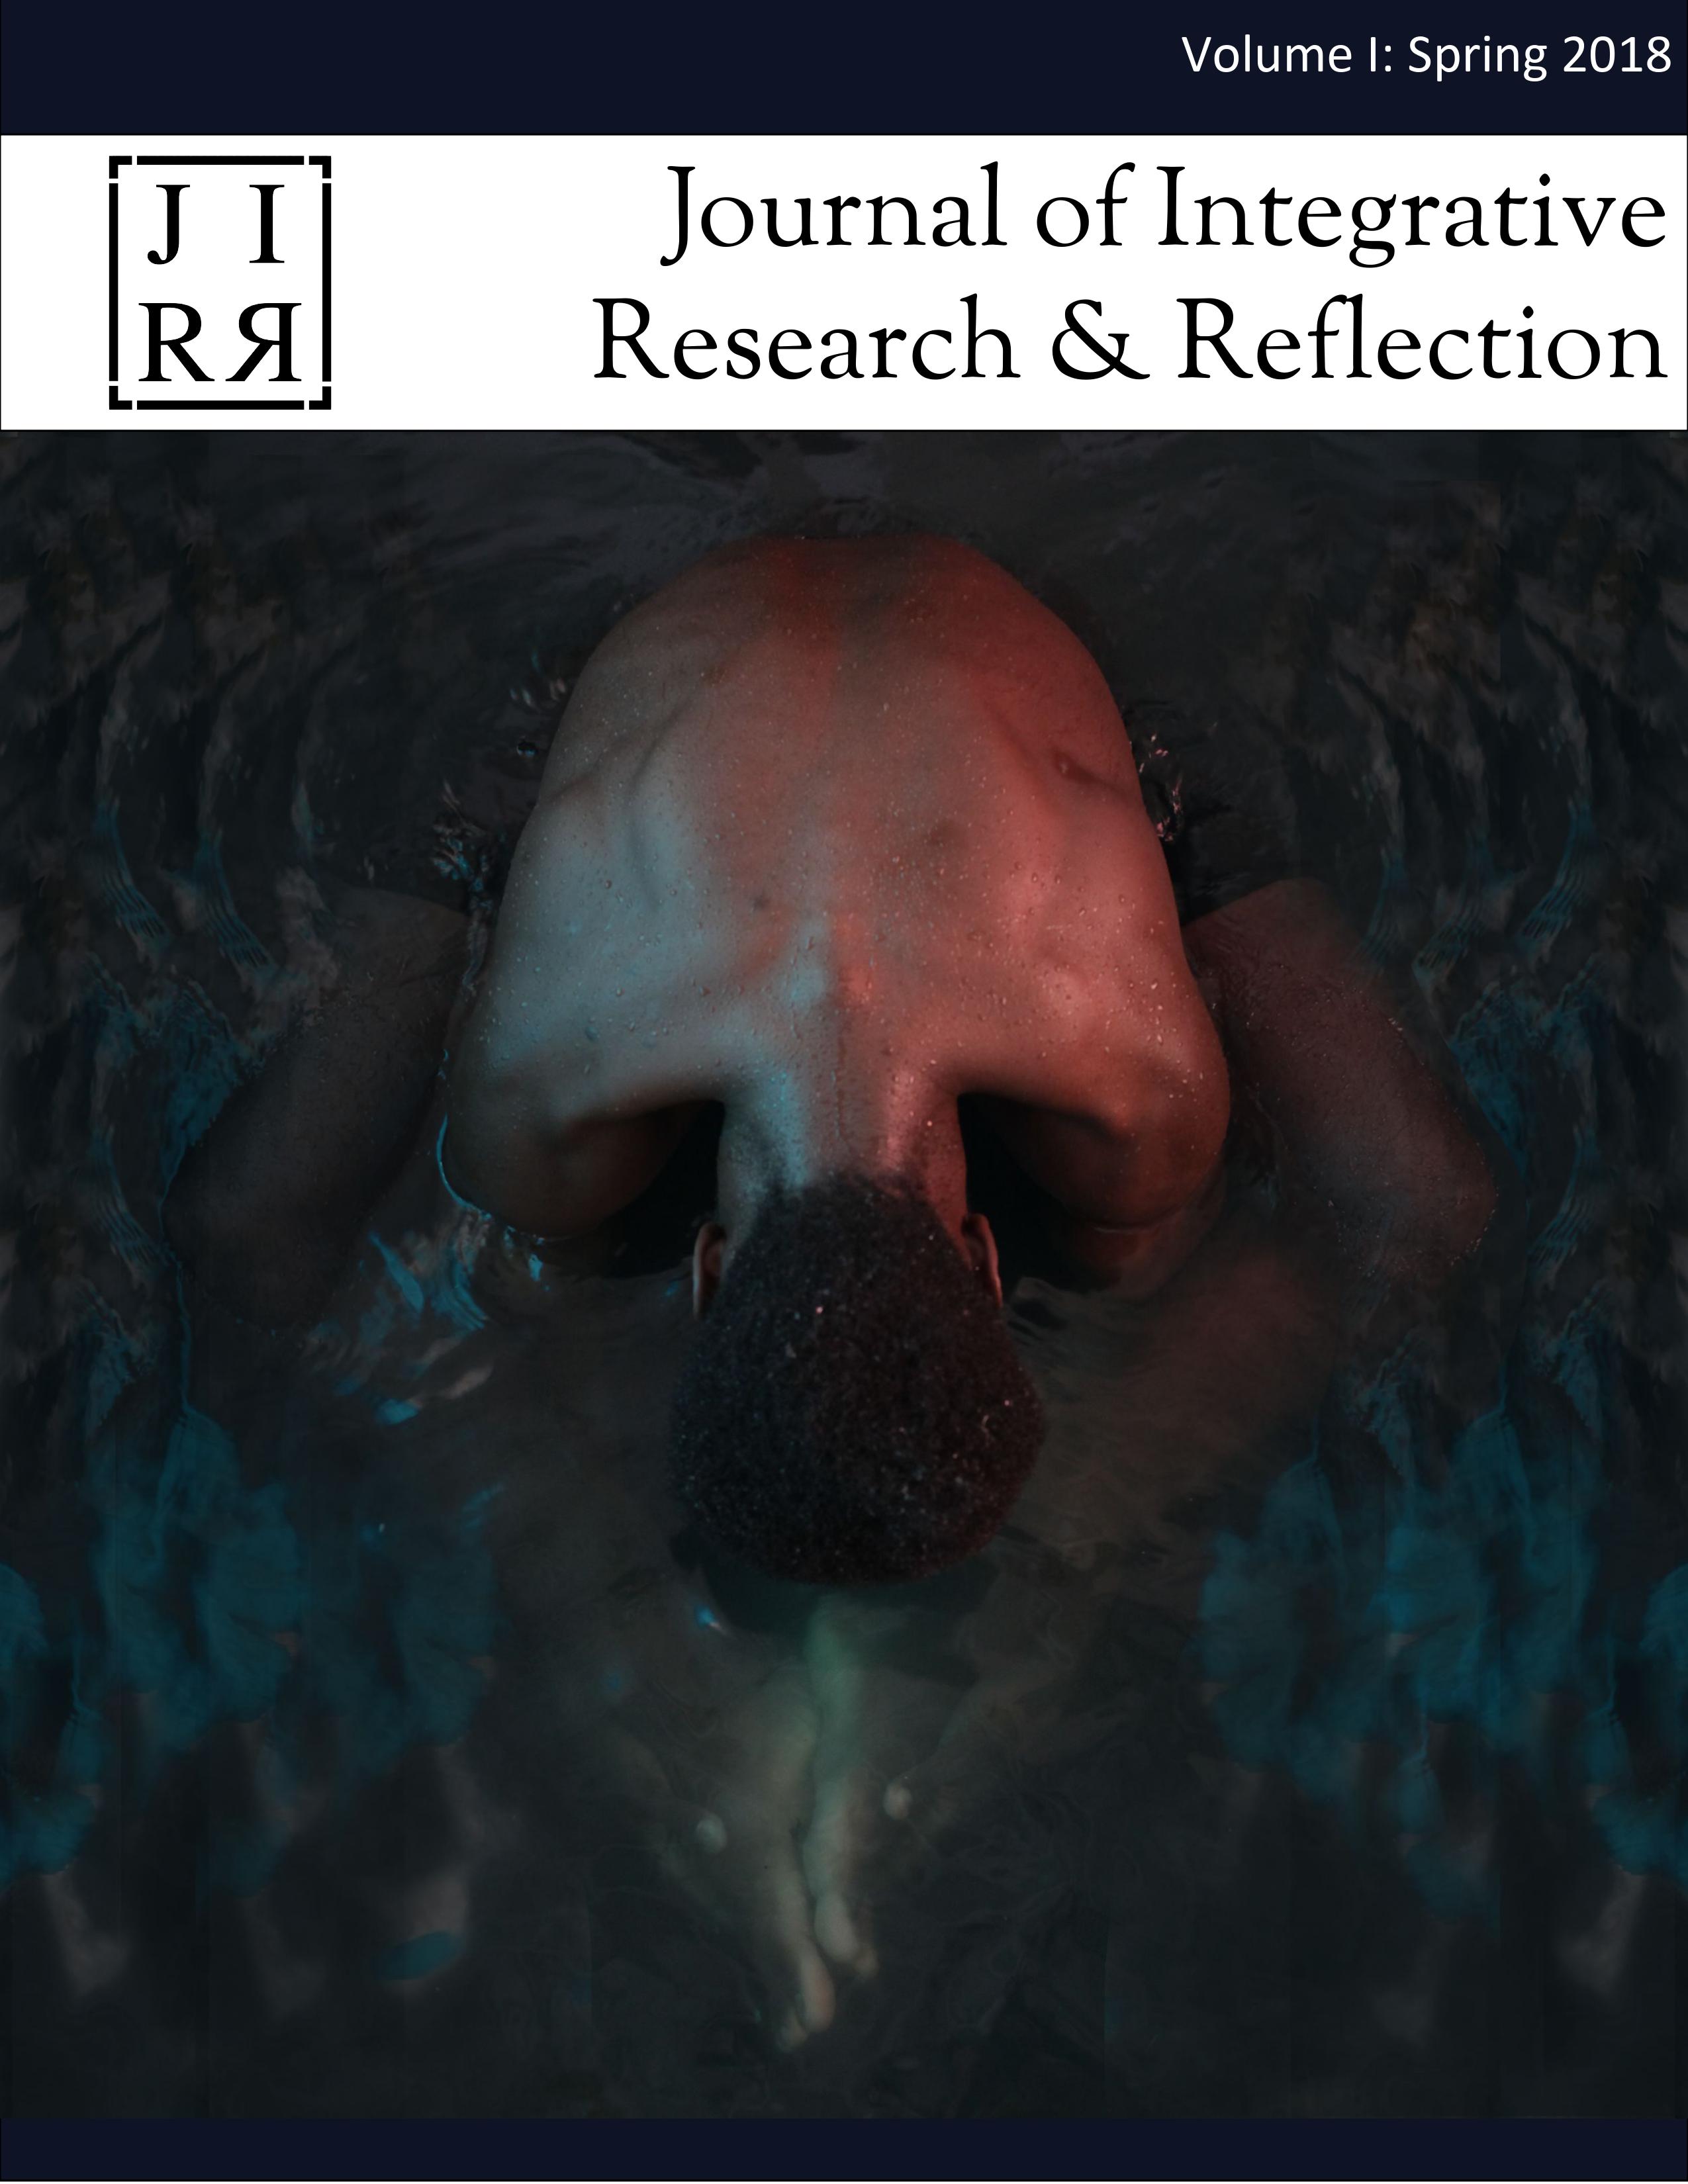 					View Vol. 1 (2018): Journal of Integrative Research & Reflection
				